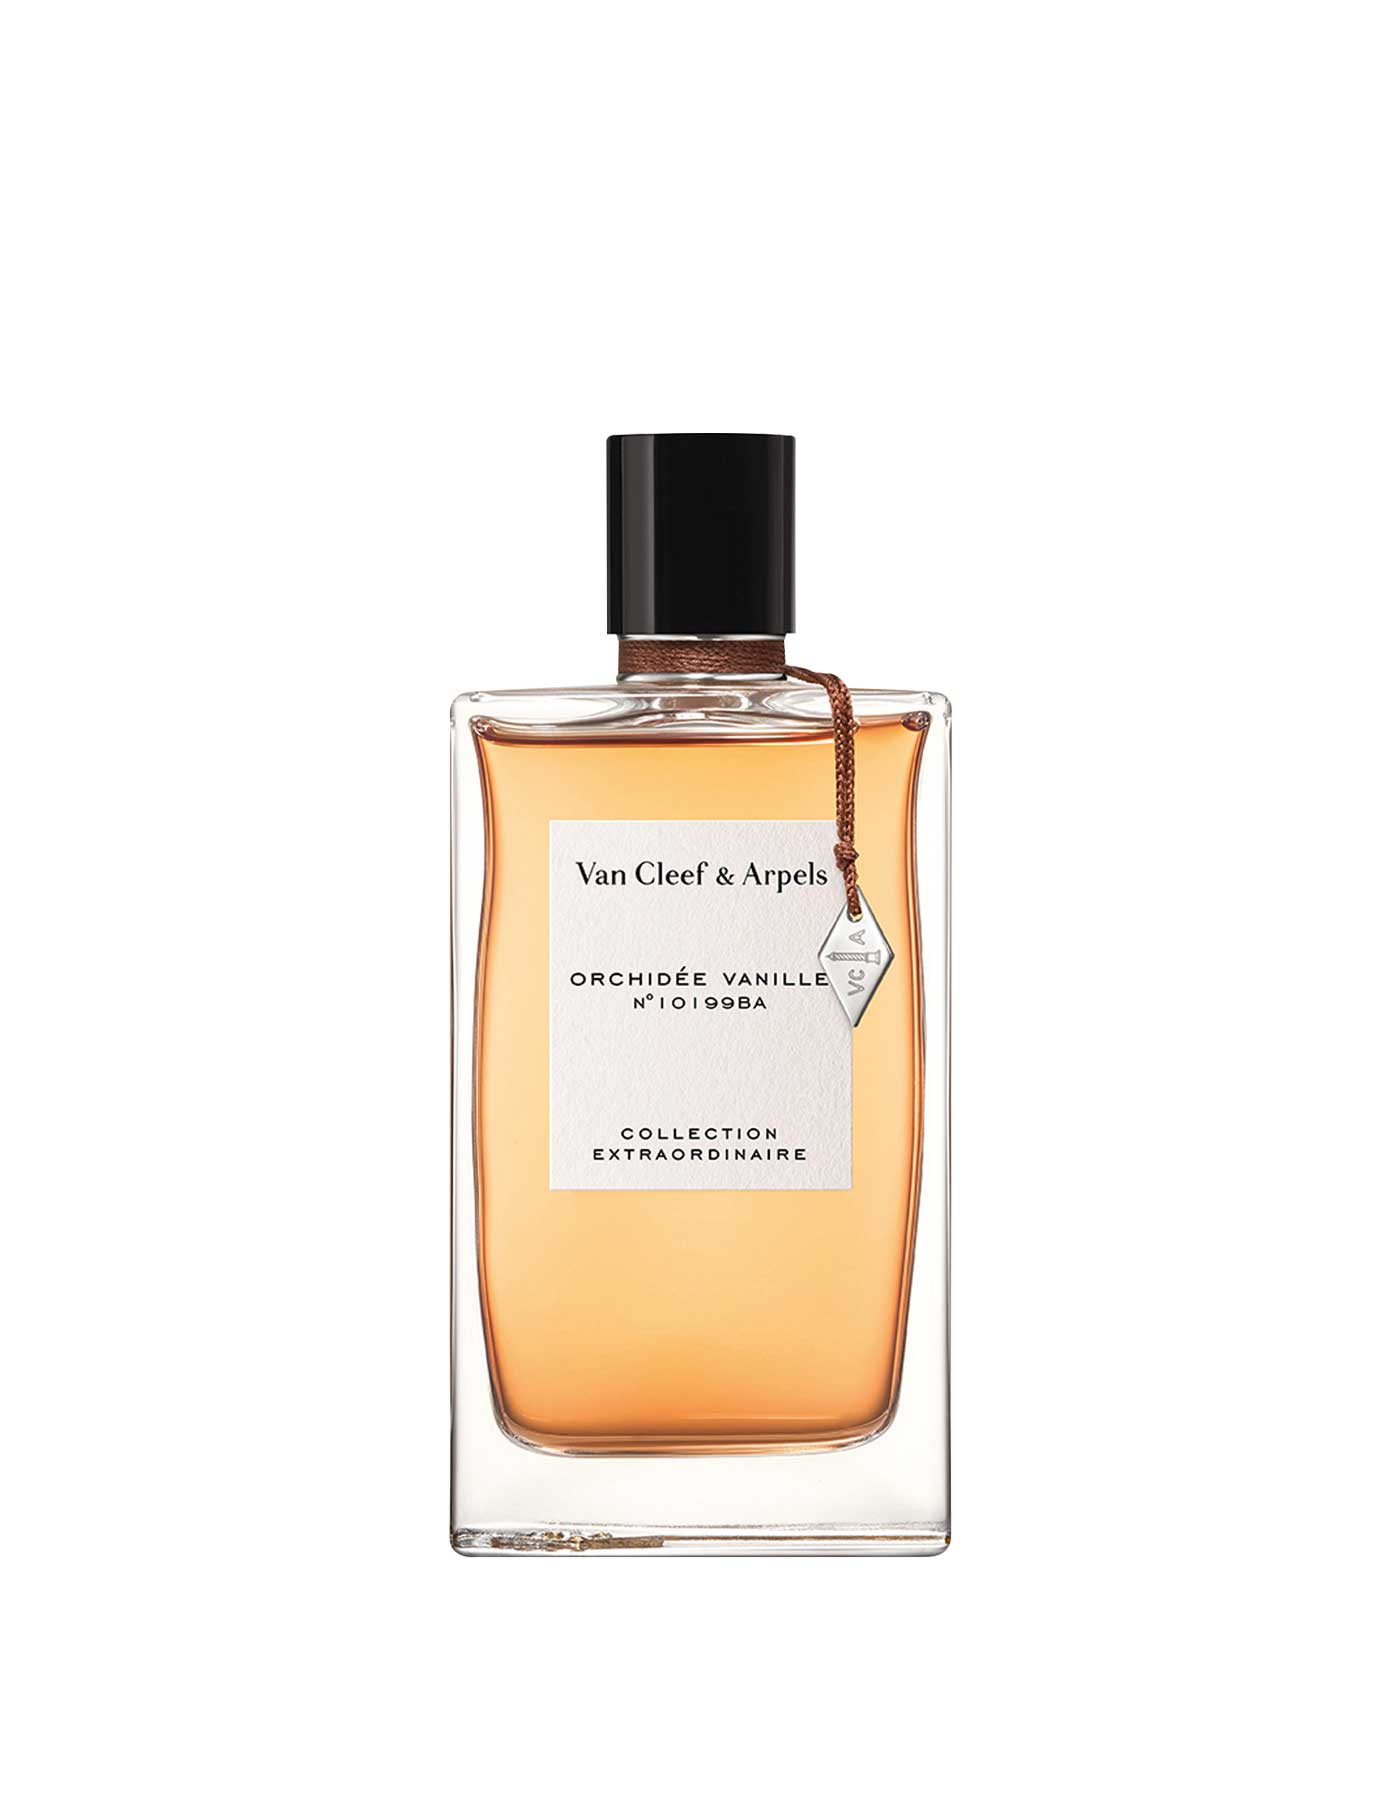 beddengoed toegang Beugel Van Cleef & Arpels CE Orchidee Vanille Edp | A La Mode | Watches, Perfumes,  Fashion Jewelry